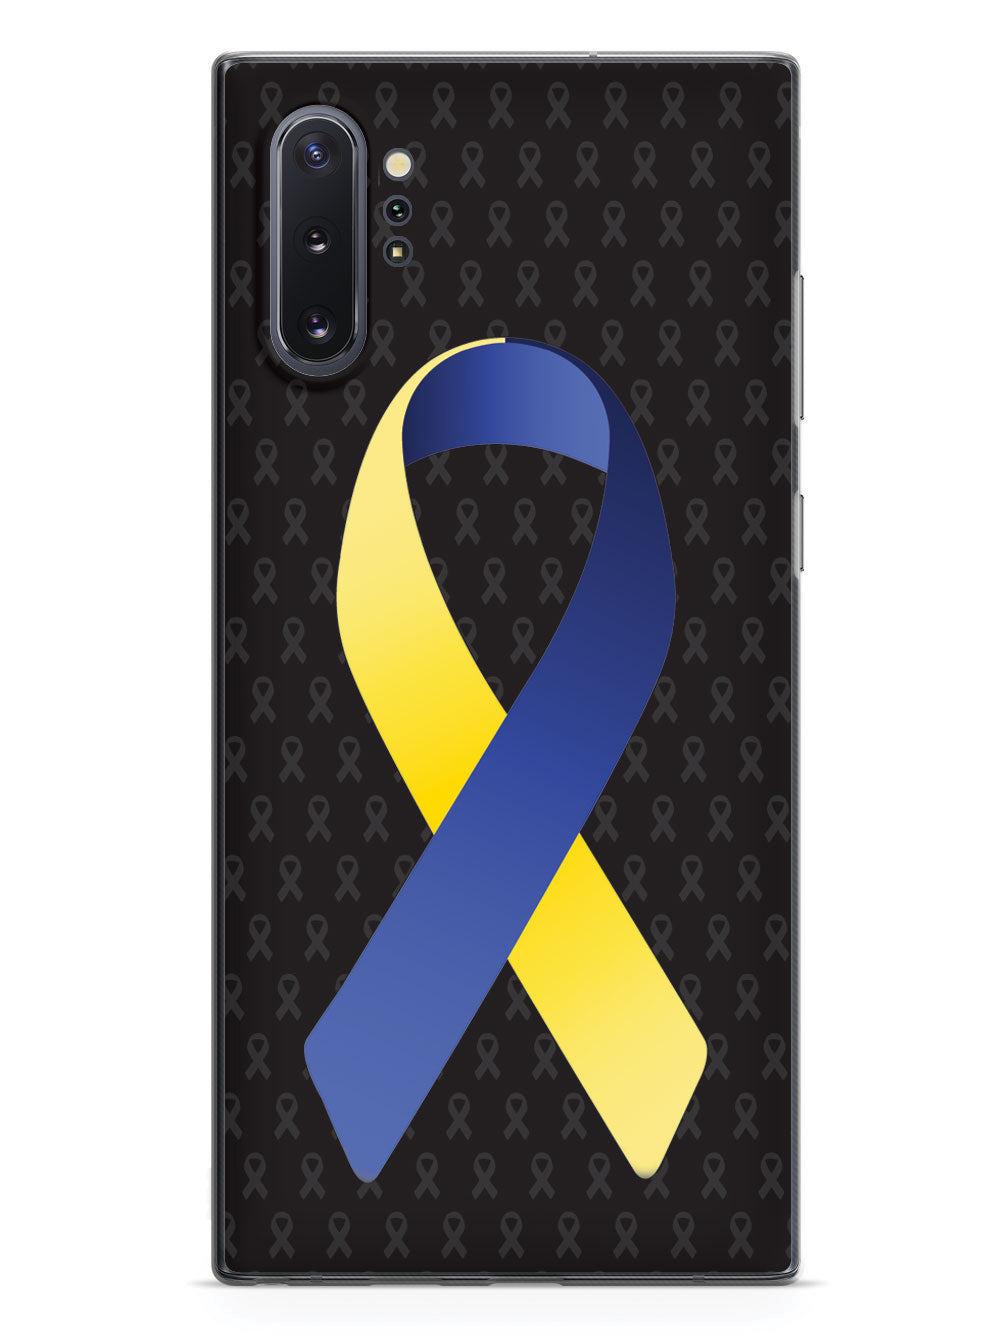 Blue and Yellow Awareness Ribbon - Black Case